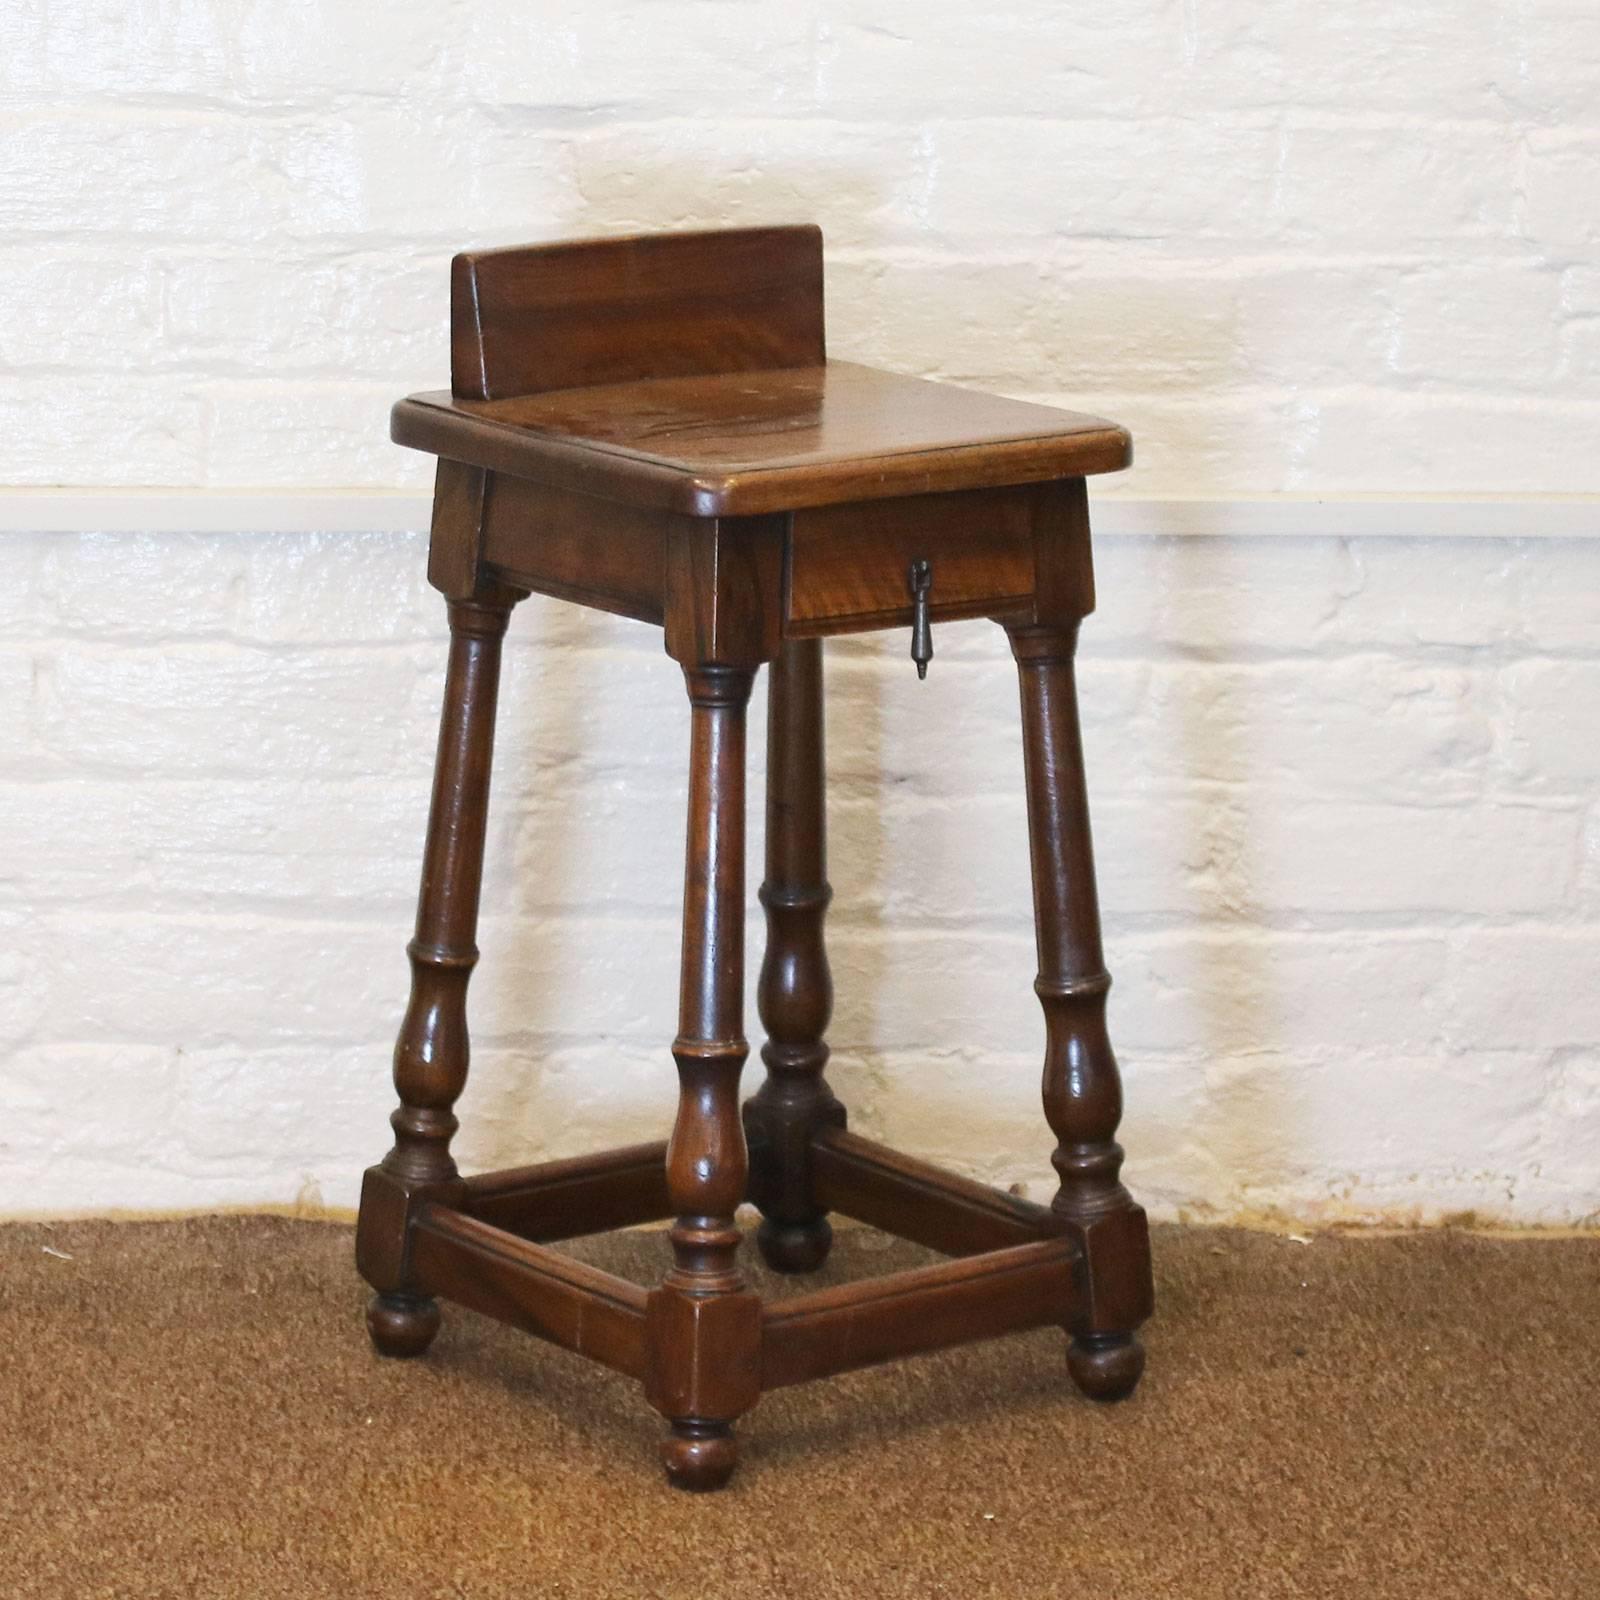 Matching pair of rustic style bedside tables in Walnut with a single working drawer.